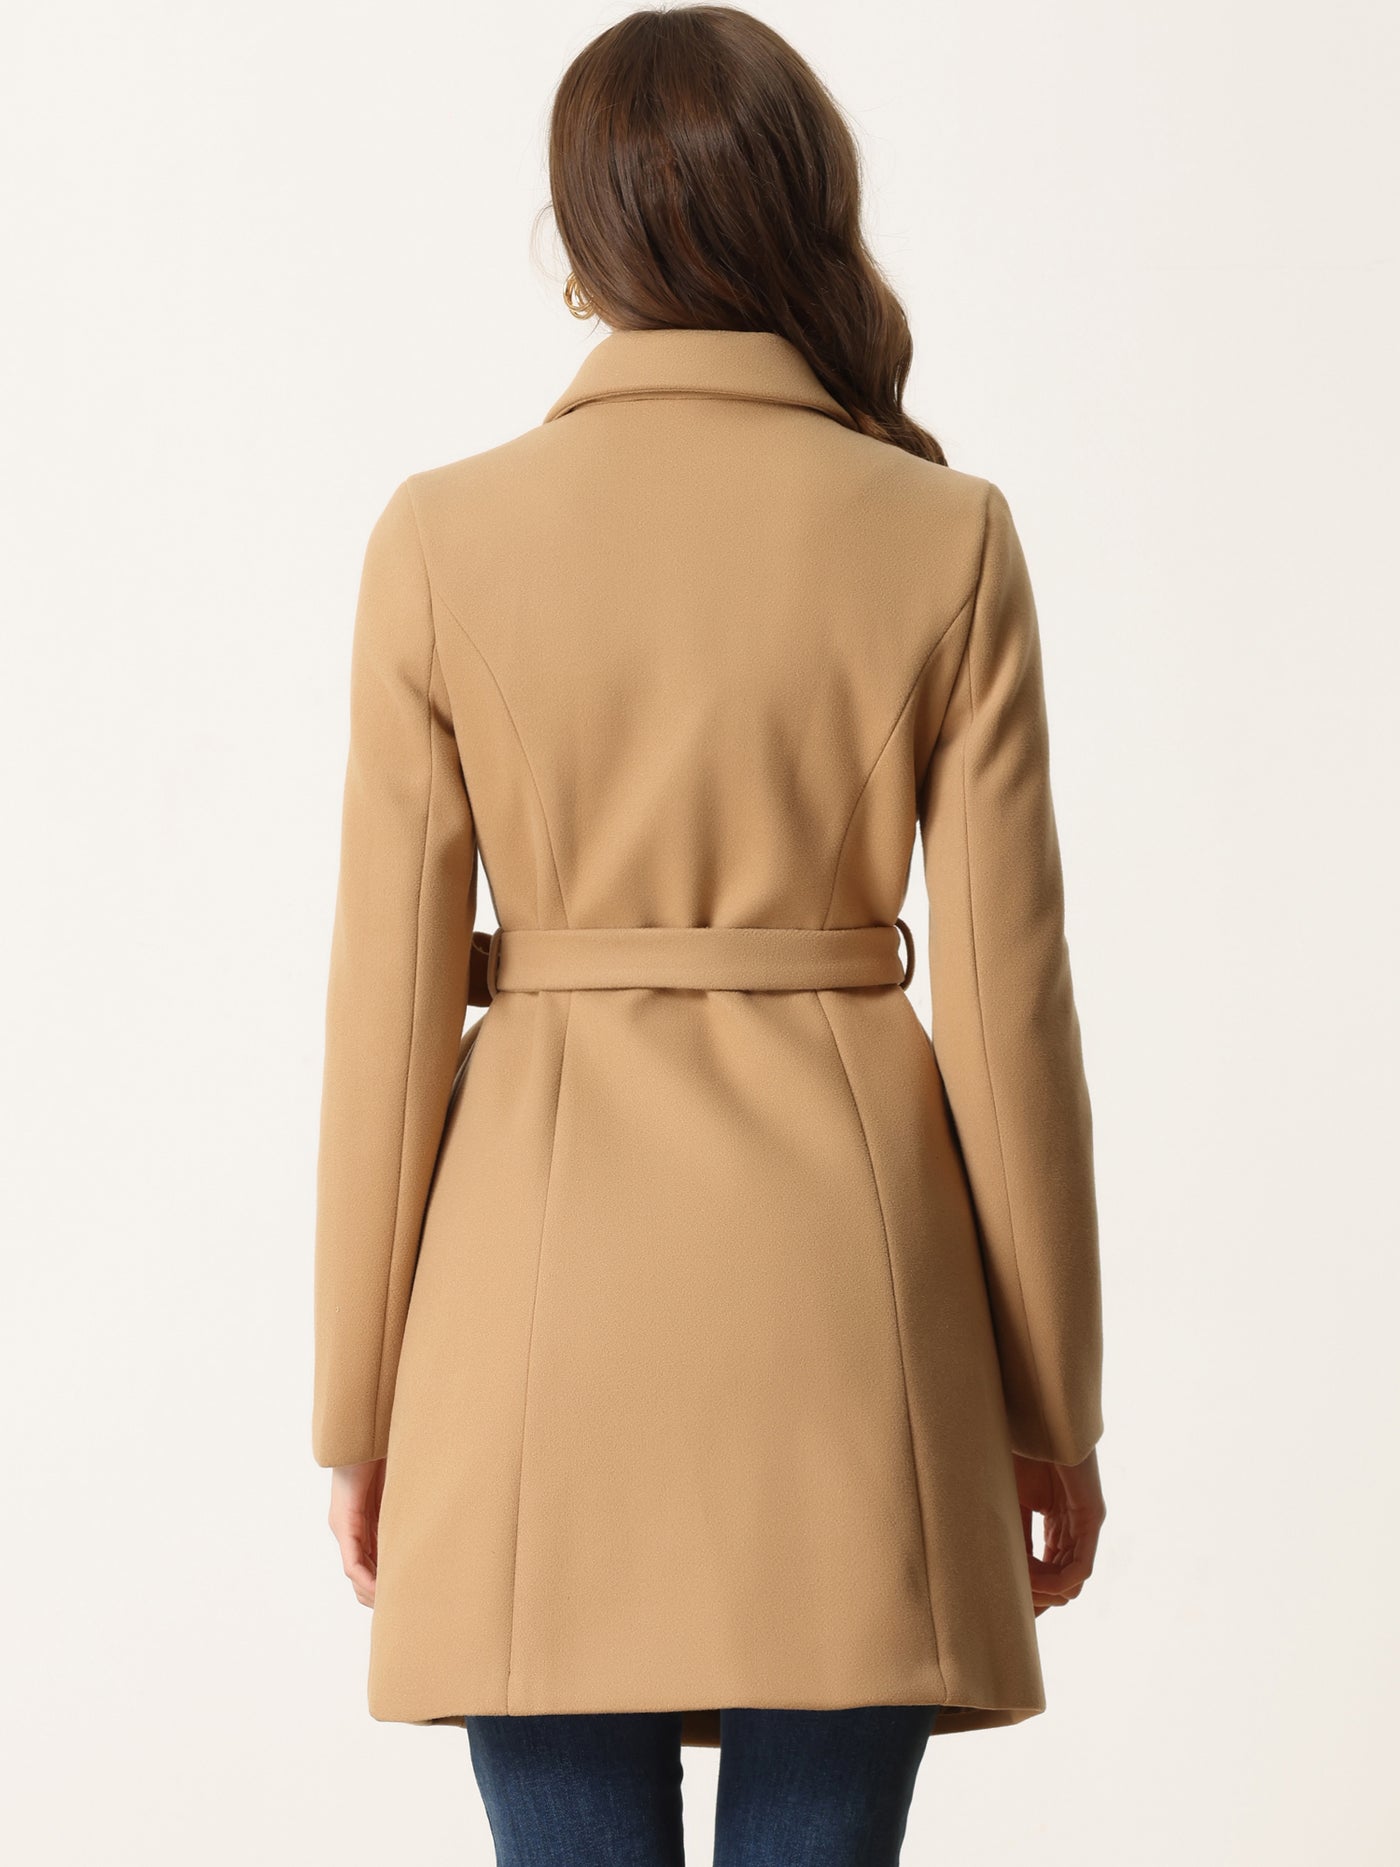 Allegra K Lapel Double Breasted Slant Pocket Button Belted Pea Coats